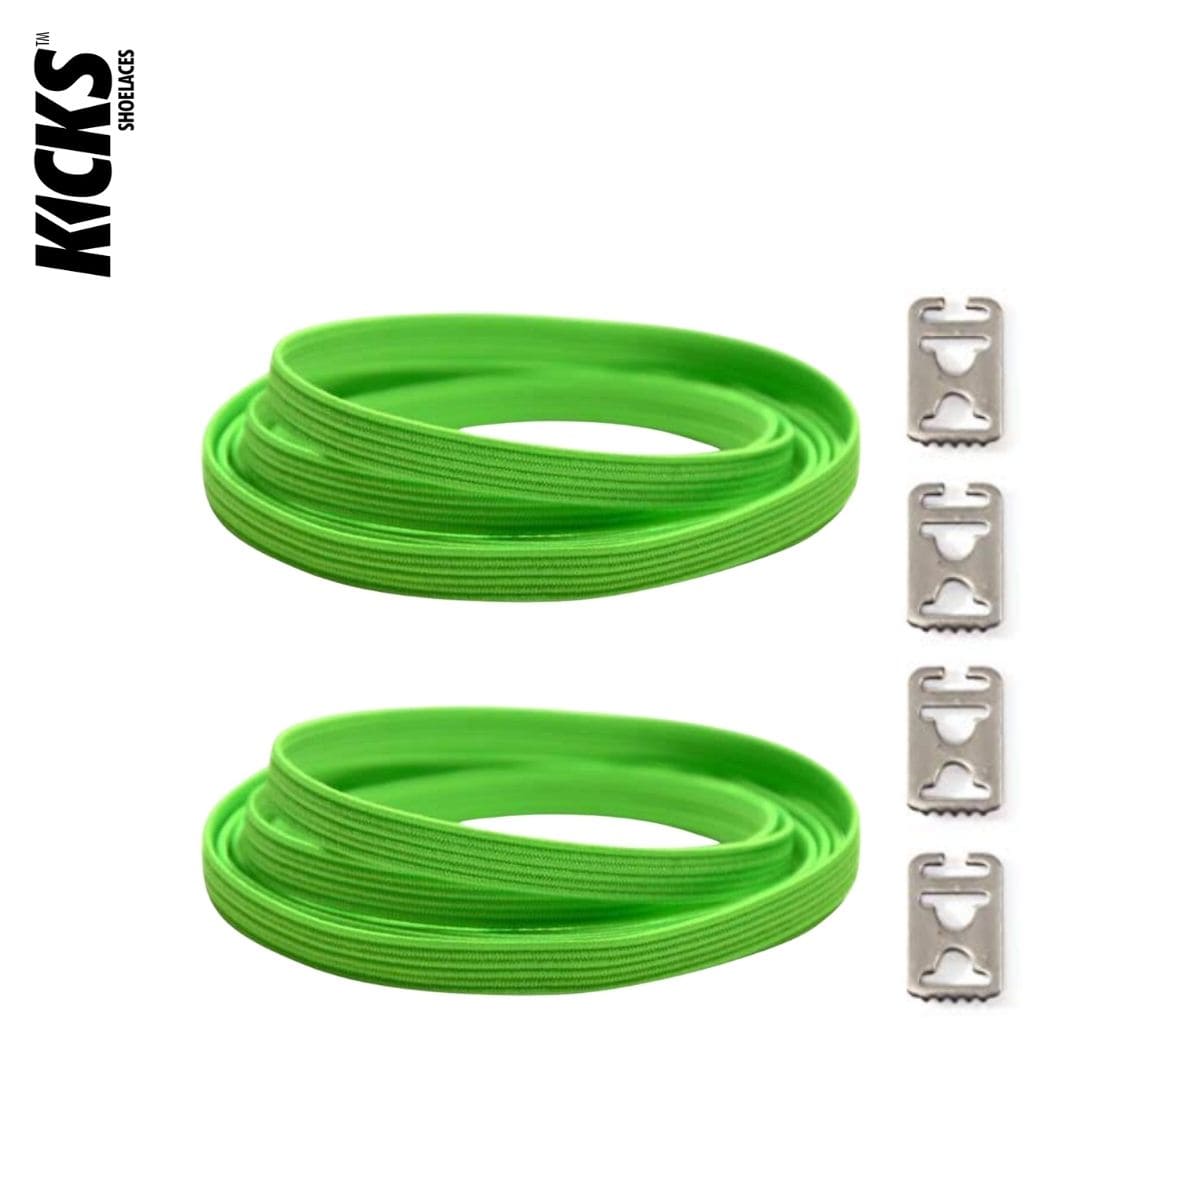 Replacement for Shoe Laces Green No-Tie Shoelaces